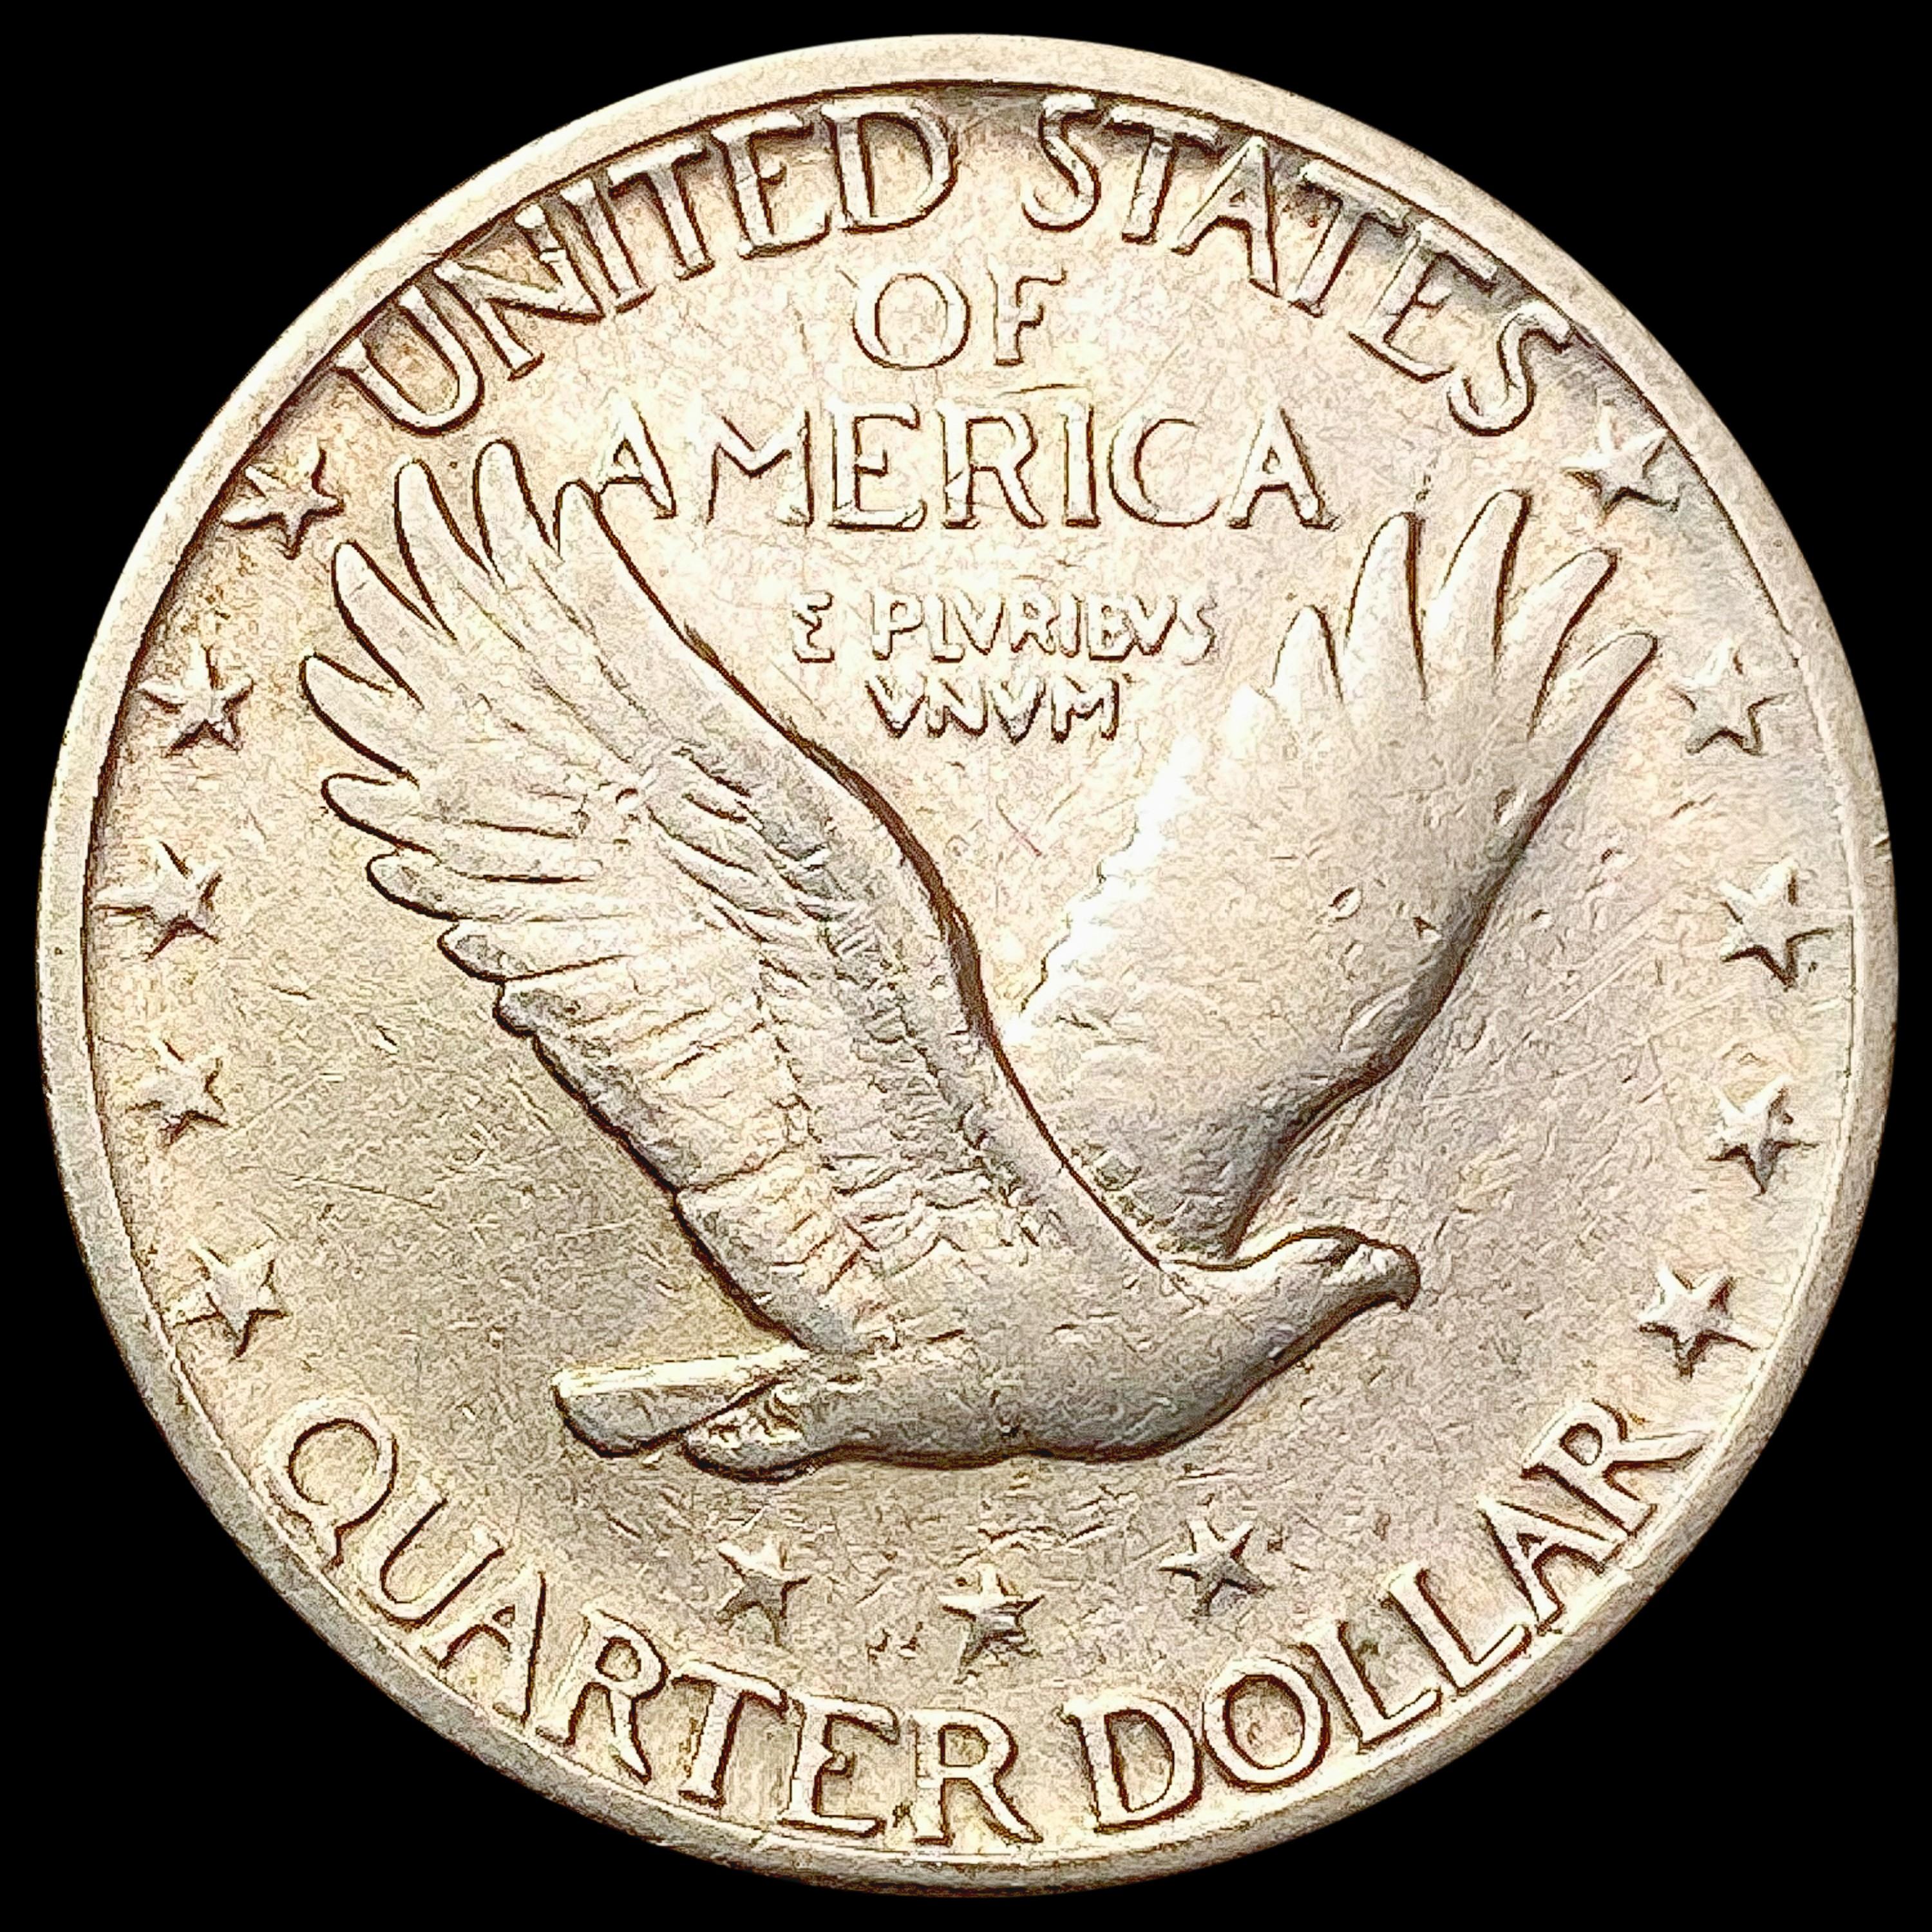 1926-S Standing Liberty Quarter NEARLY UNCIRCULATE